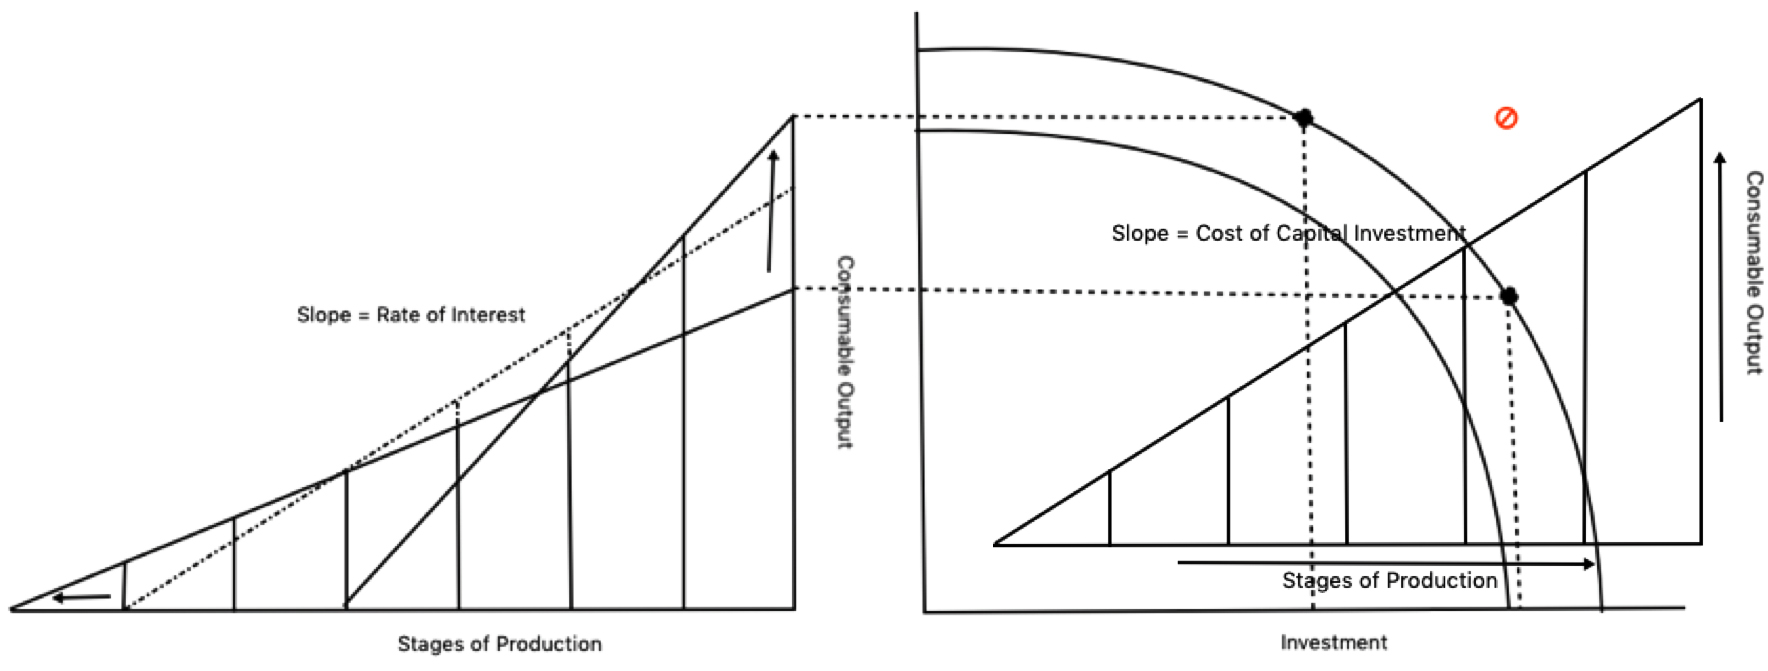 Slope Rate